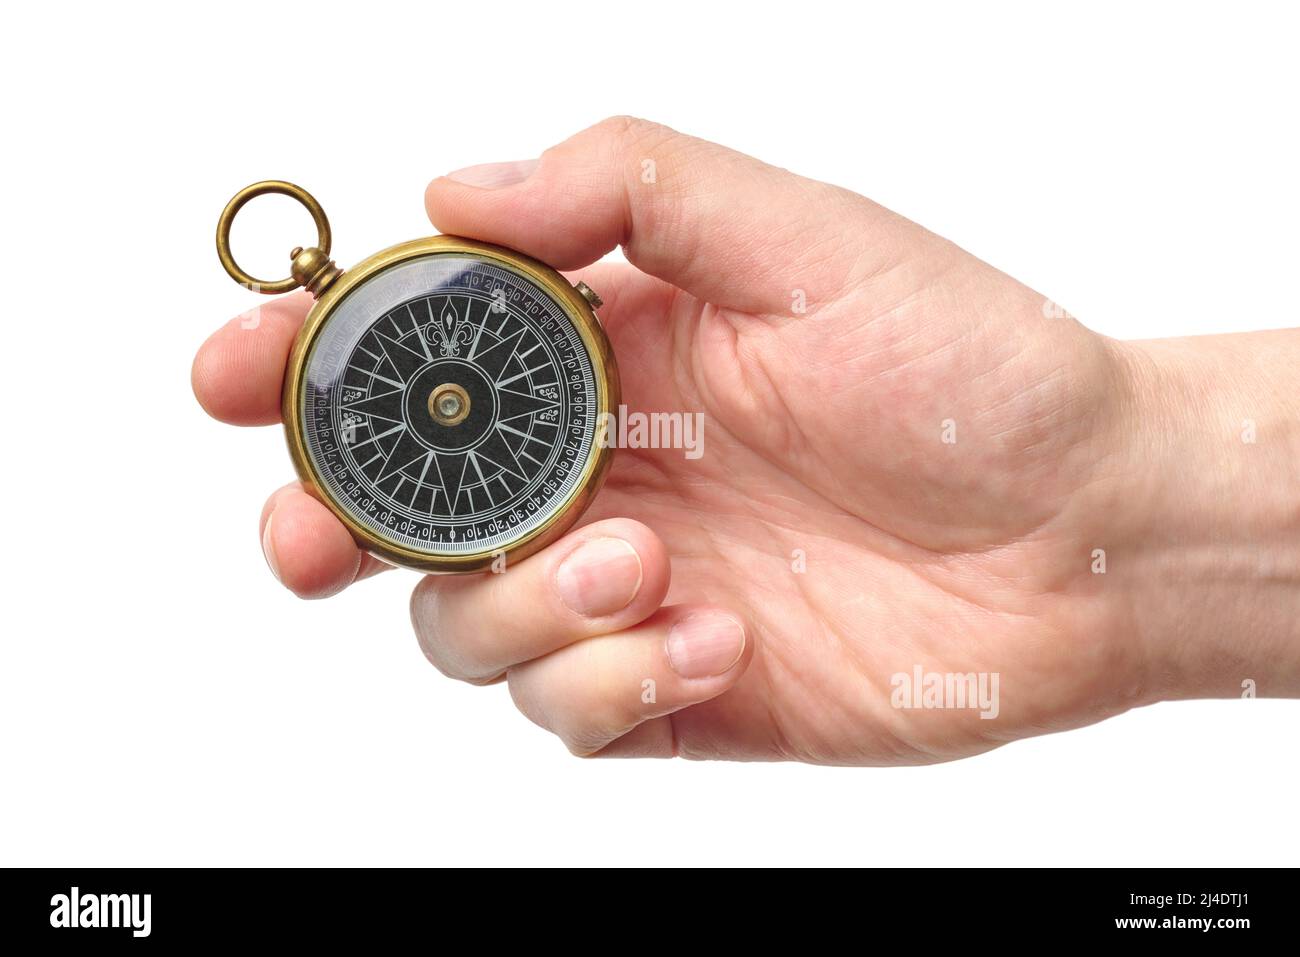 Hand holding traditional magnetic compass, vintage retro style, isolated on white background Stock Photo